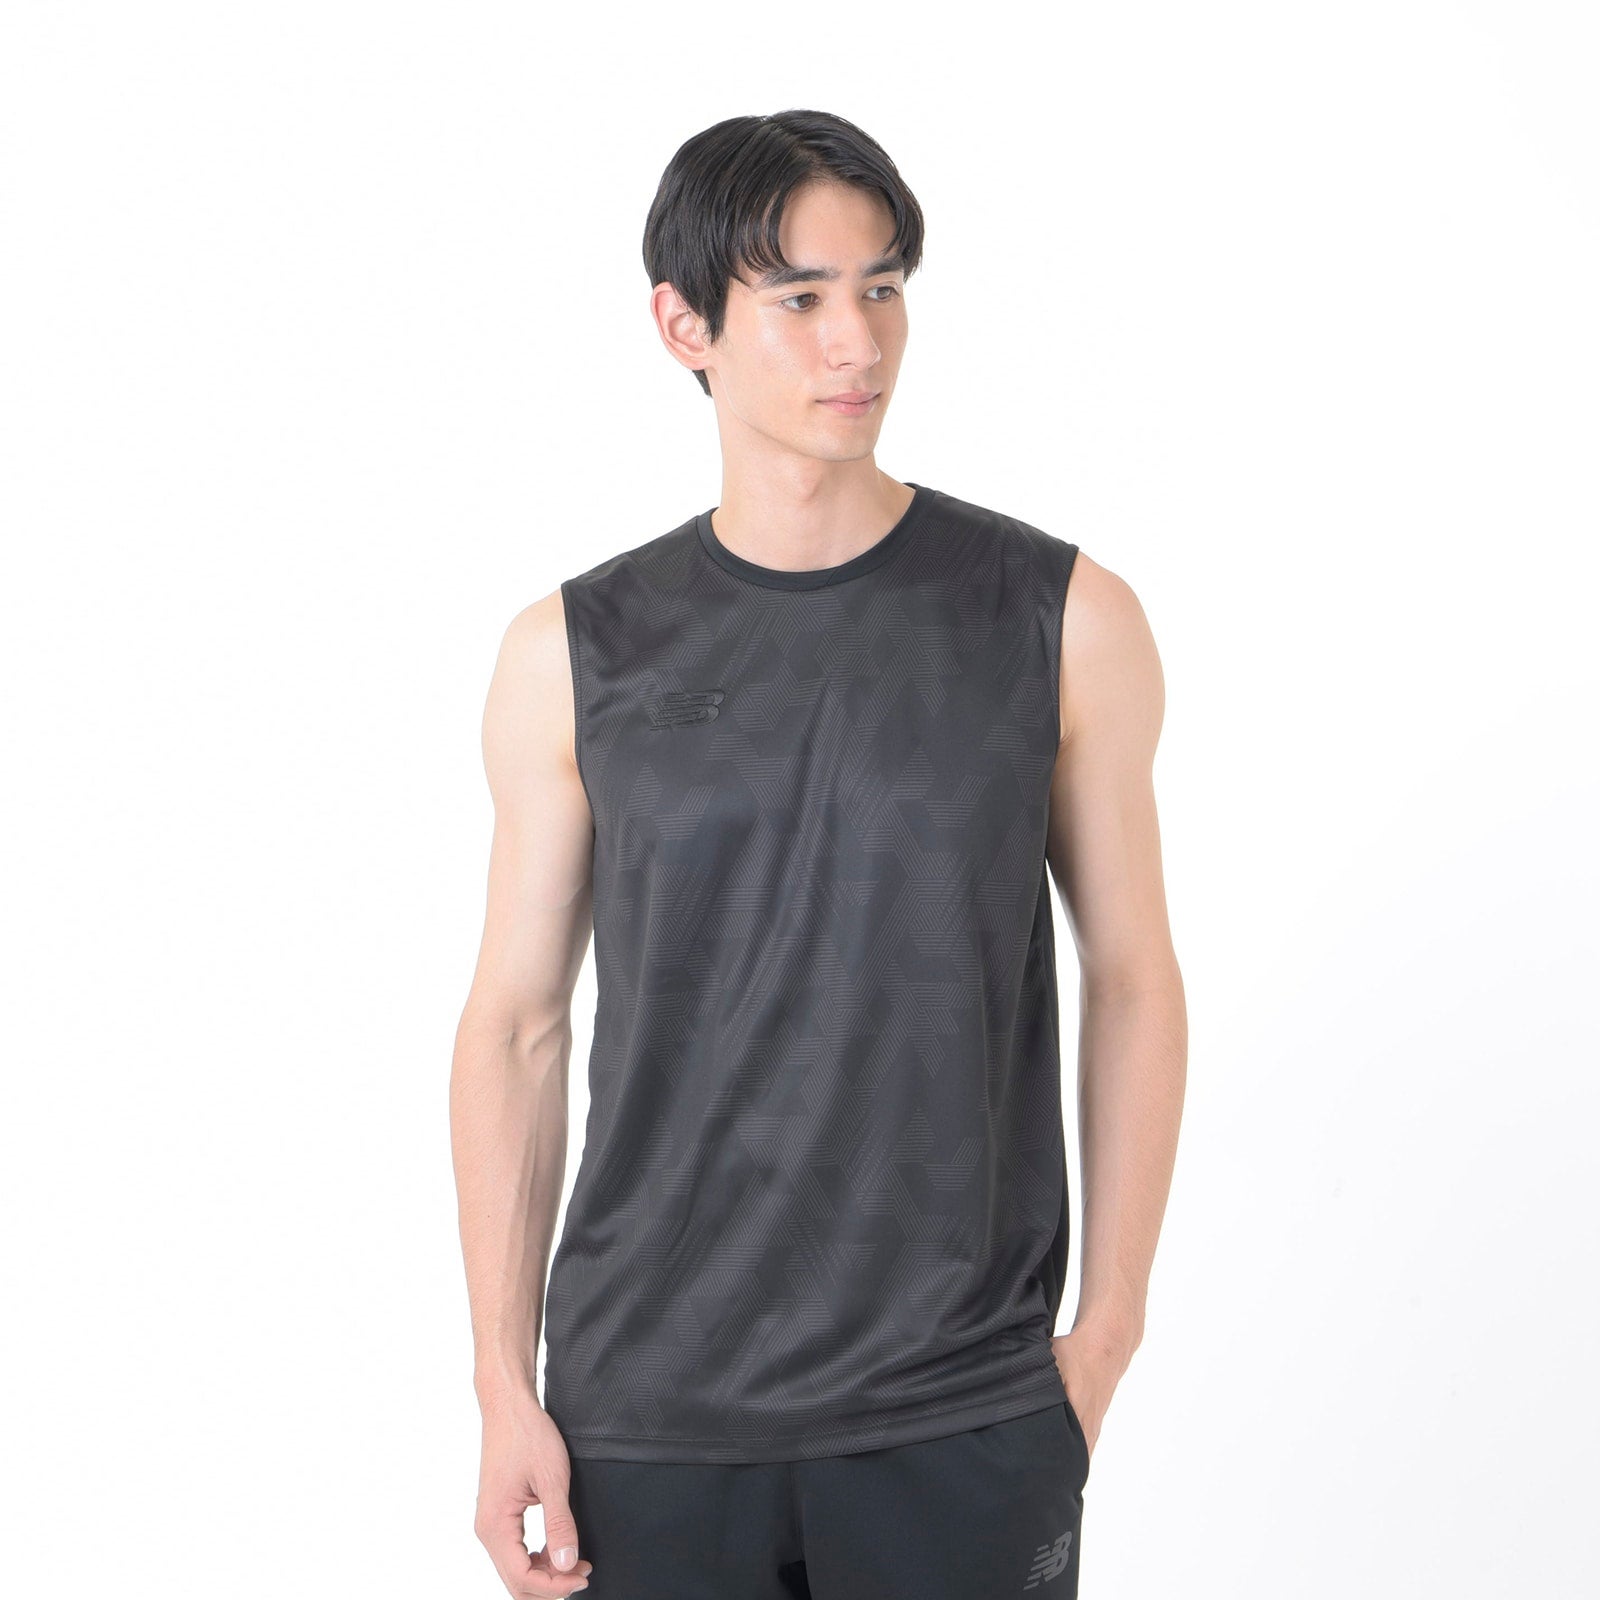 Black Out Collection Practice Shirt Sleeveless